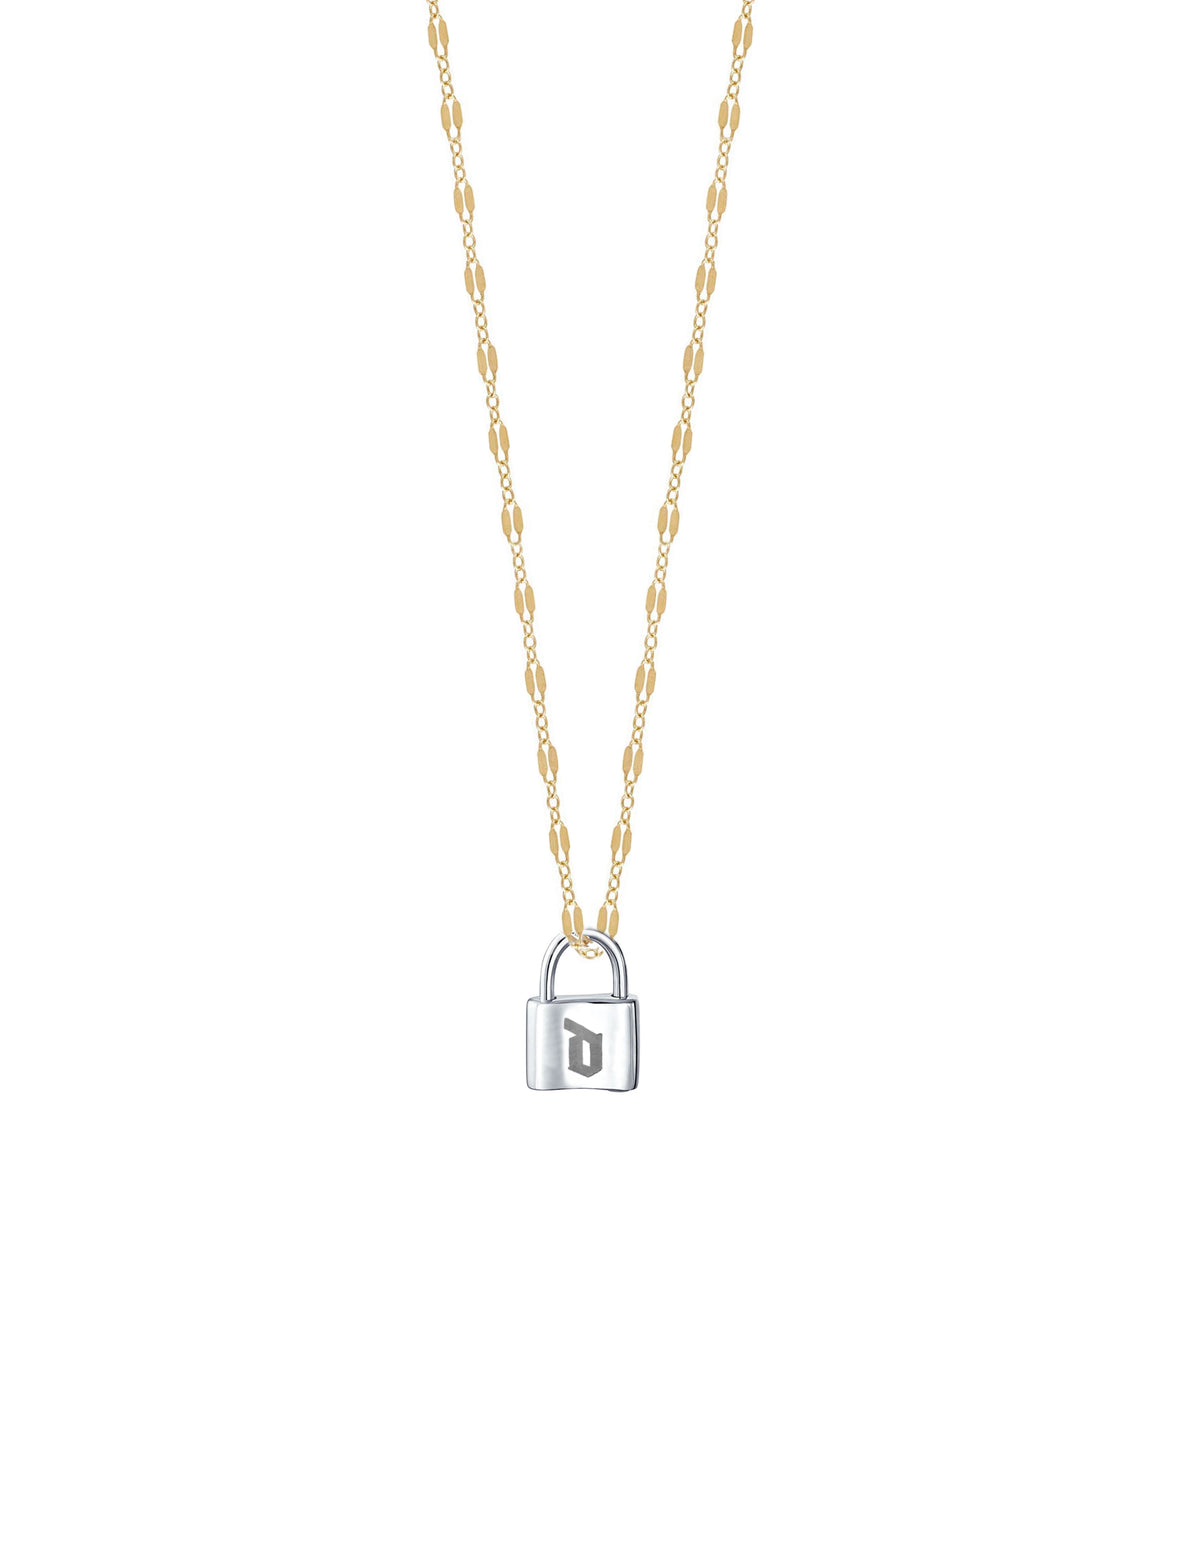 Sarah Personalized Lock and Key Necklace Sterling Silver Pendant with Sterling Silver Chain / 20